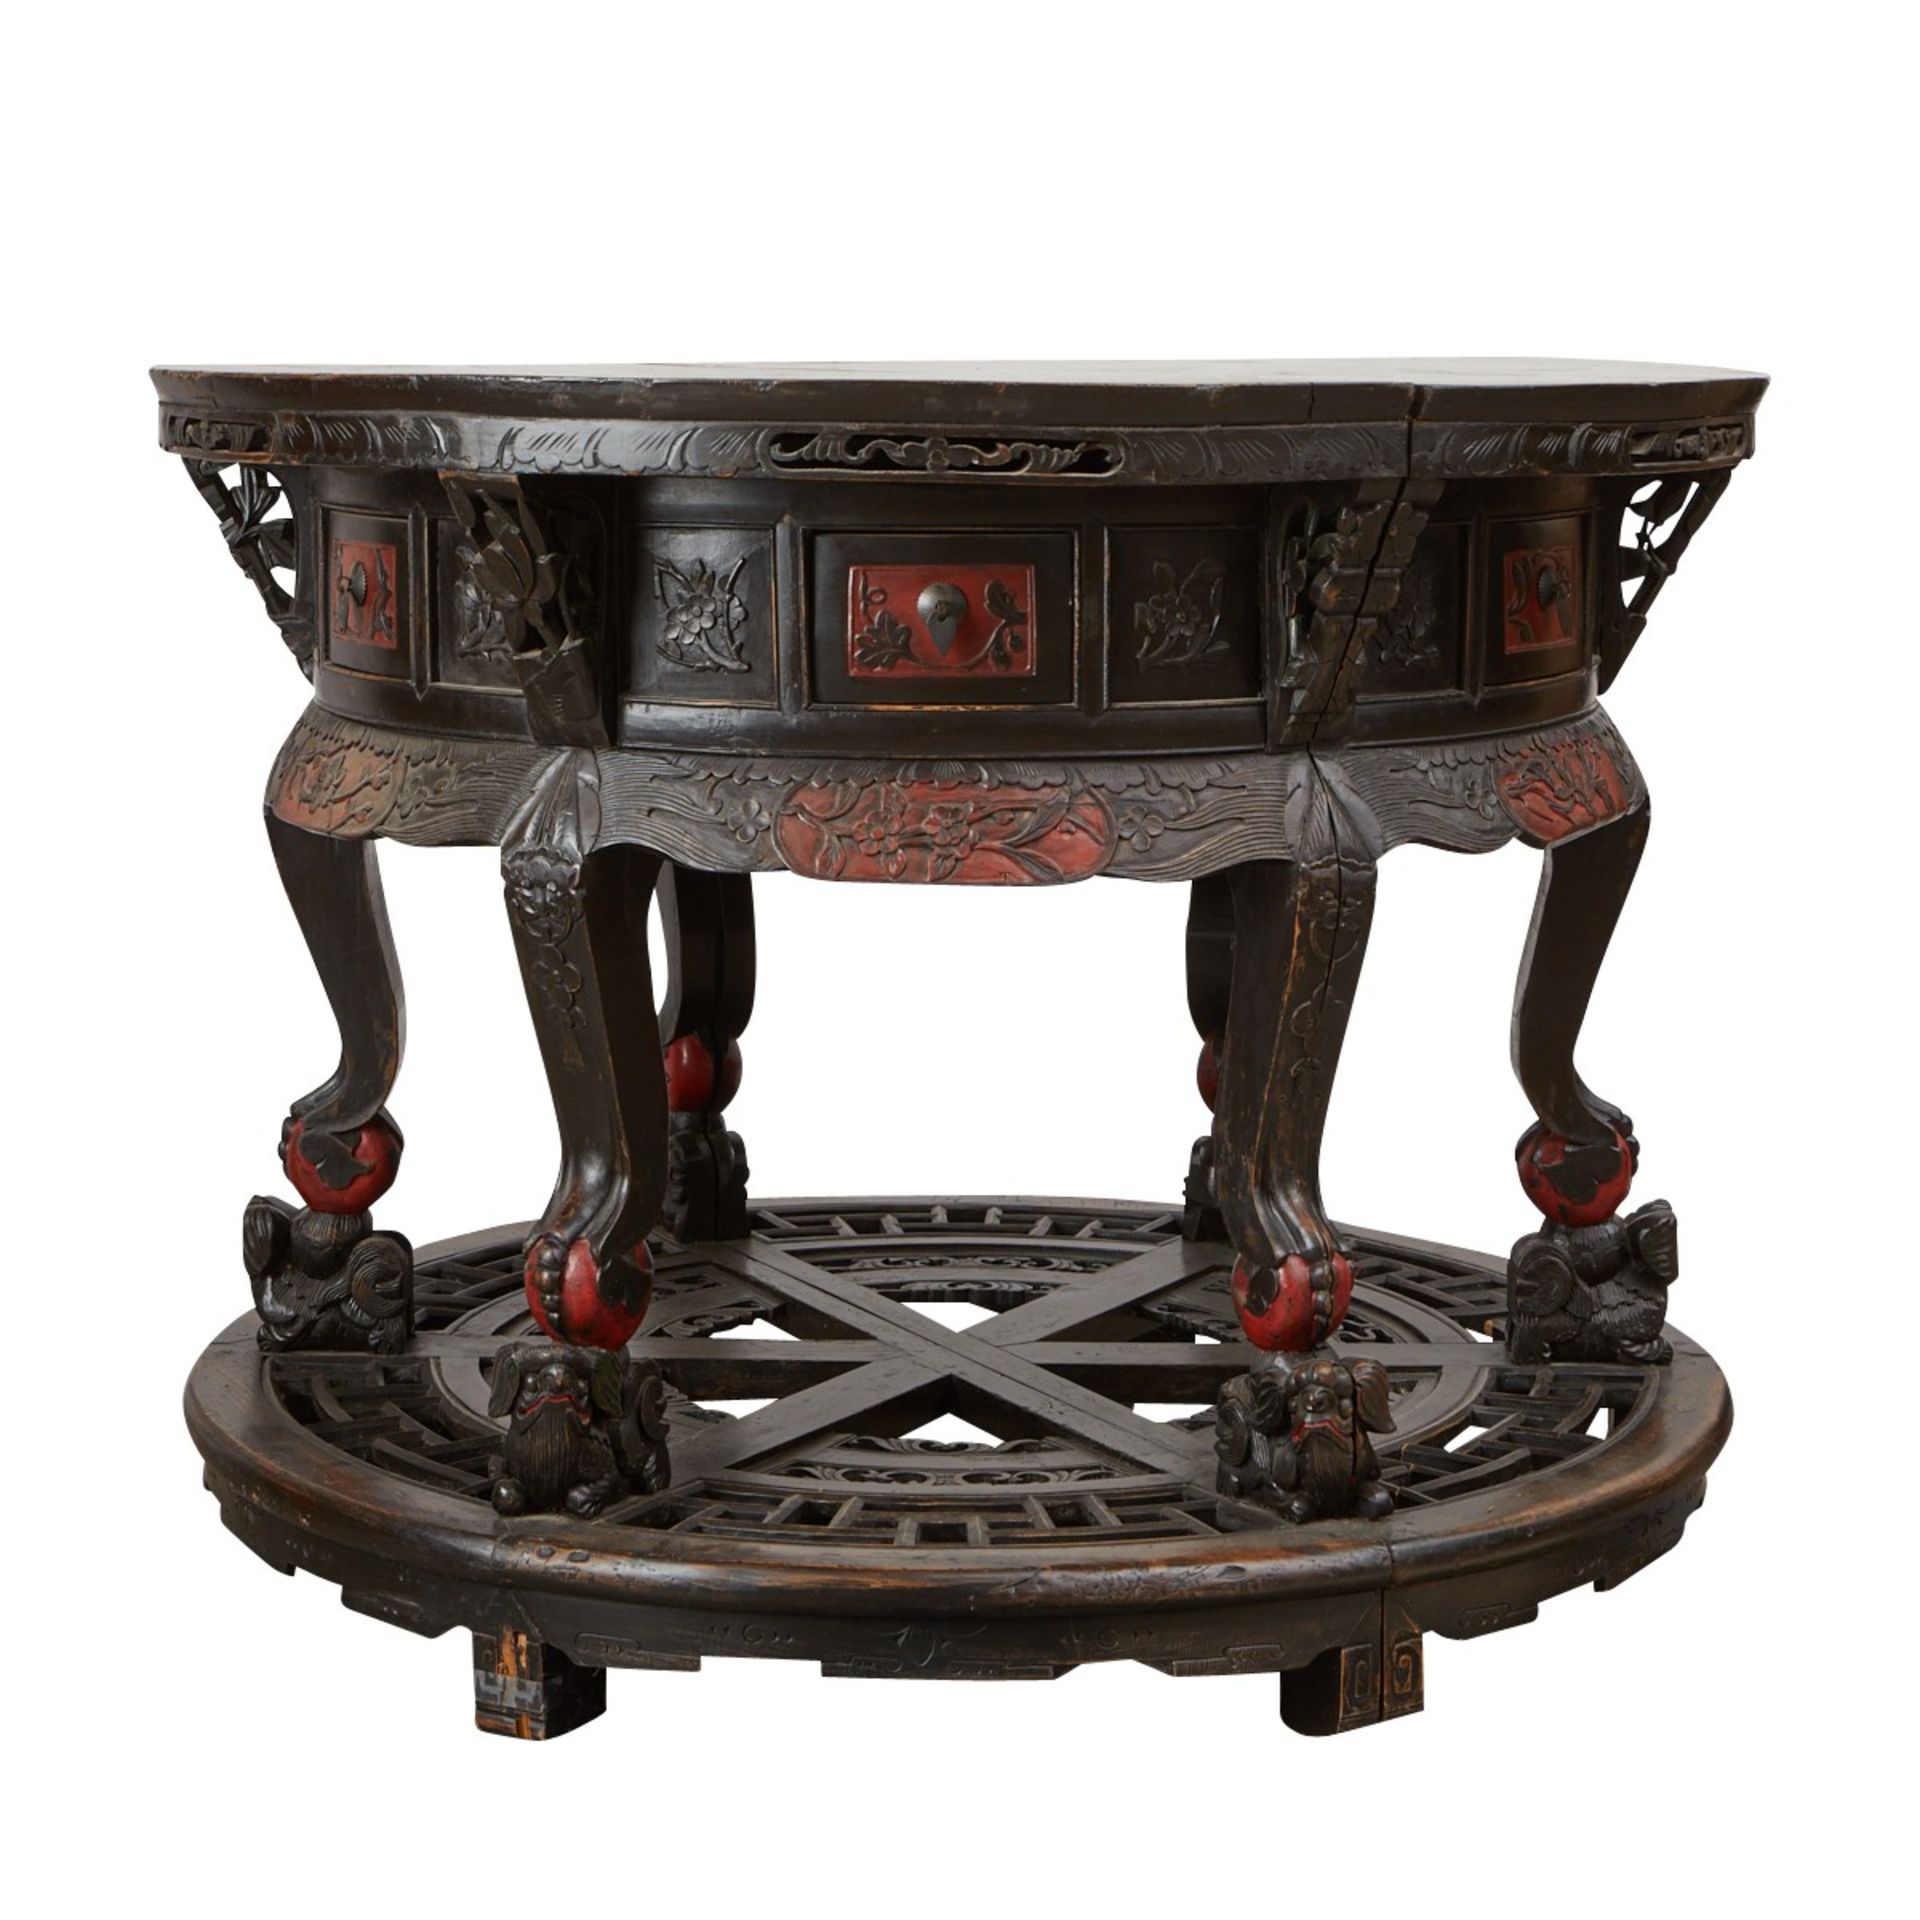 Chinese Round Carved Wood Table w/ Drawers 19th c. - Image 7 of 11